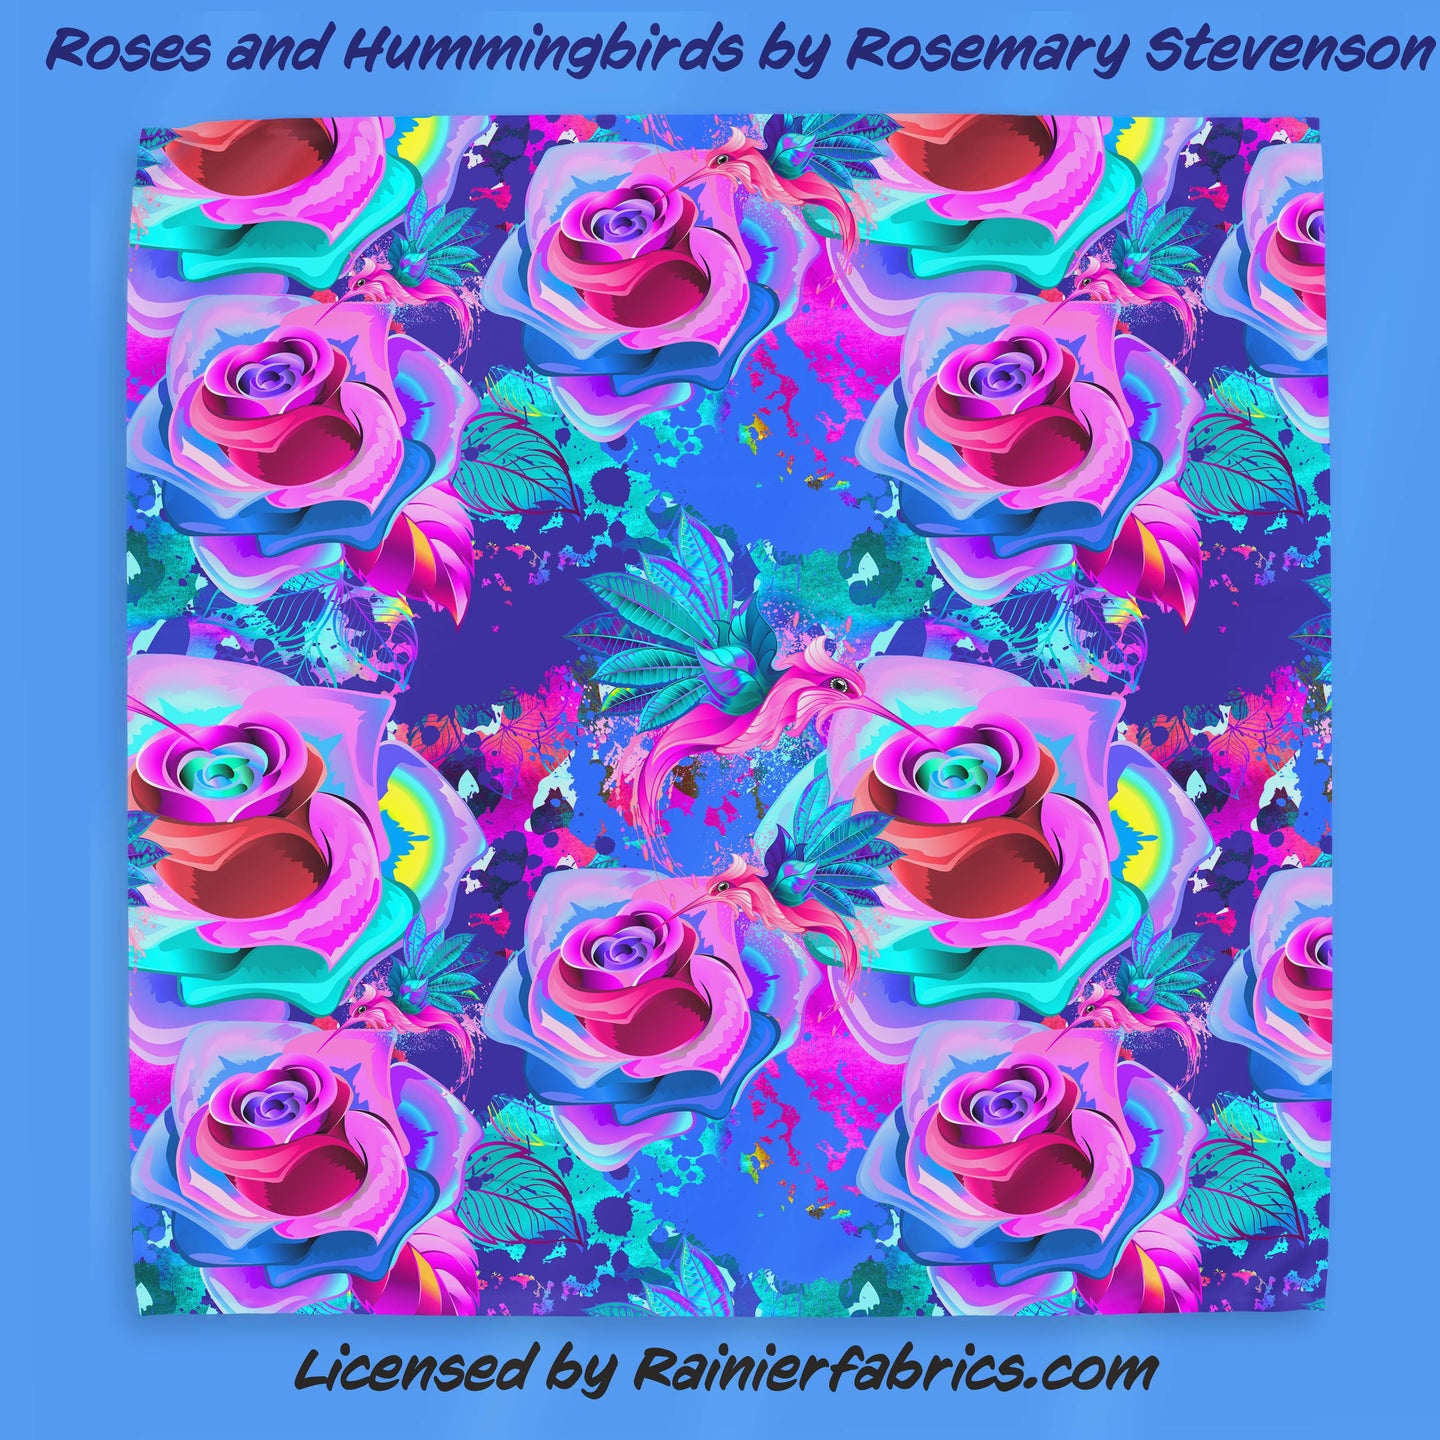 Roses and Hummingbirds from Rosemary Stevenson - 2-5 day TAT - Order by 1/2 yard; Blankets and towels available too